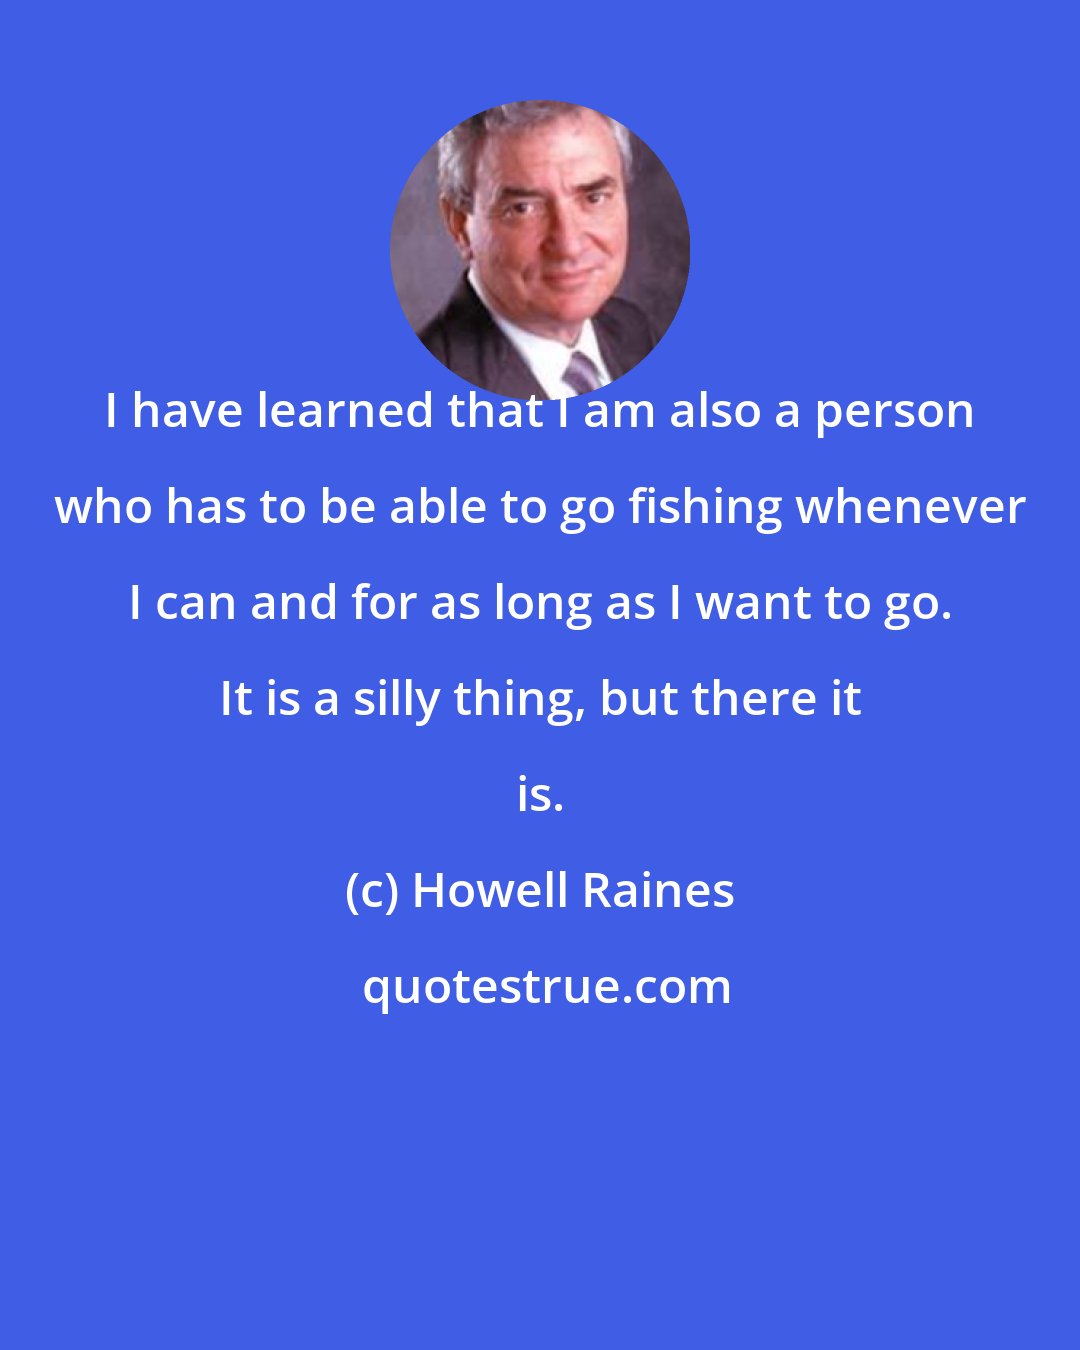 Howell Raines: I have learned that I am also a person who has to be able to go fishing whenever I can and for as long as I want to go. It is a silly thing, but there it is.